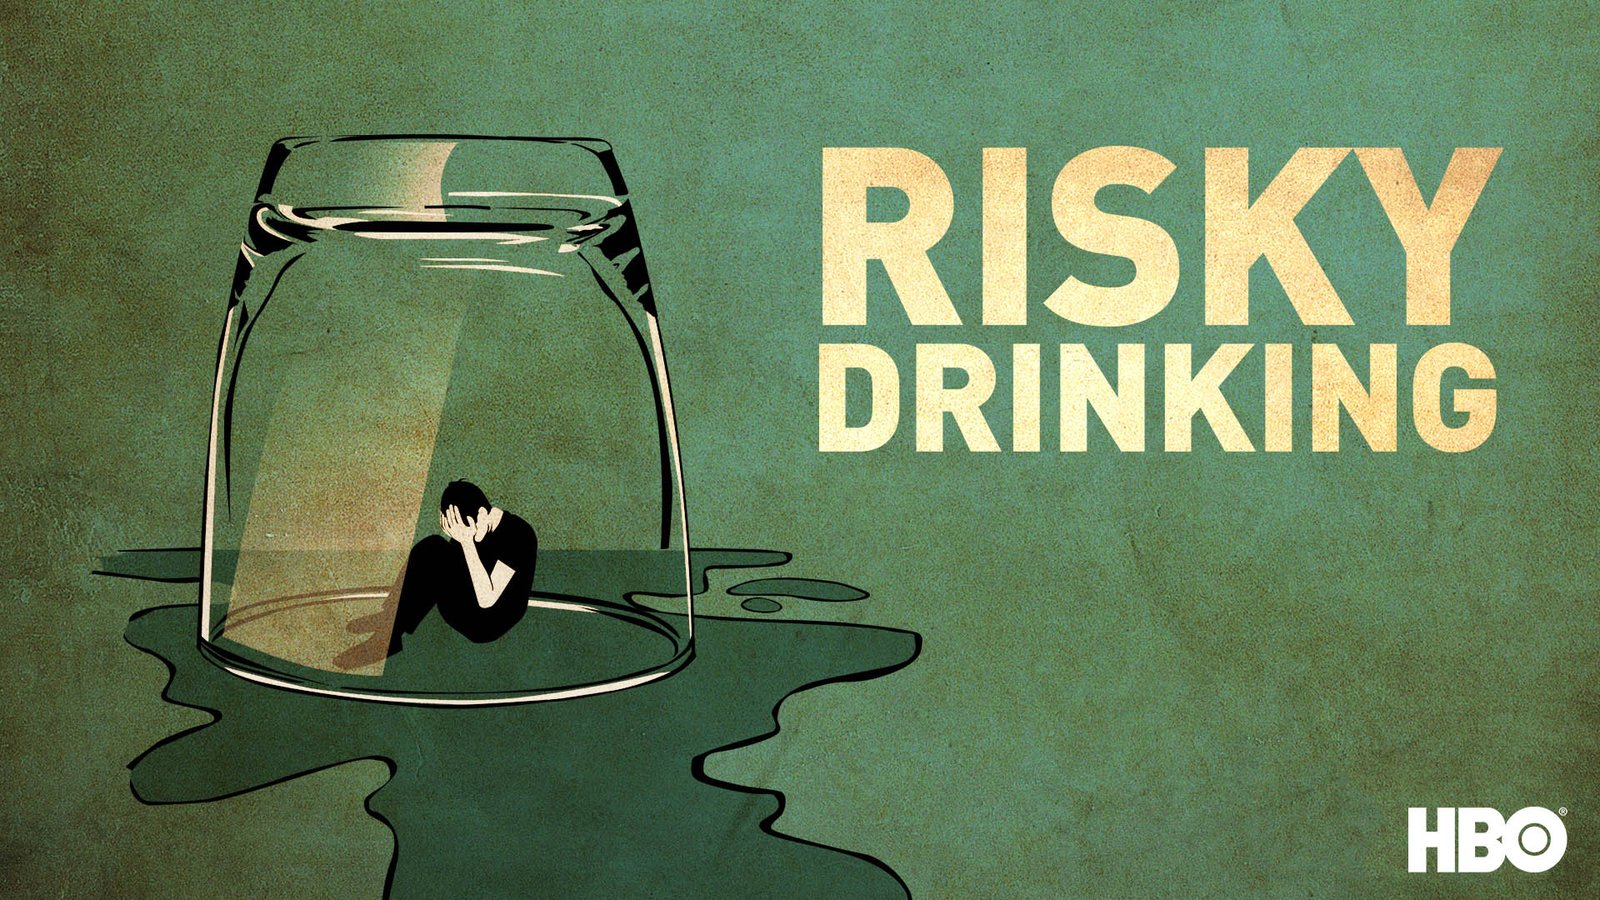 Risky Drinking - Investigating the Stages and Risks of Alcohol Abuse